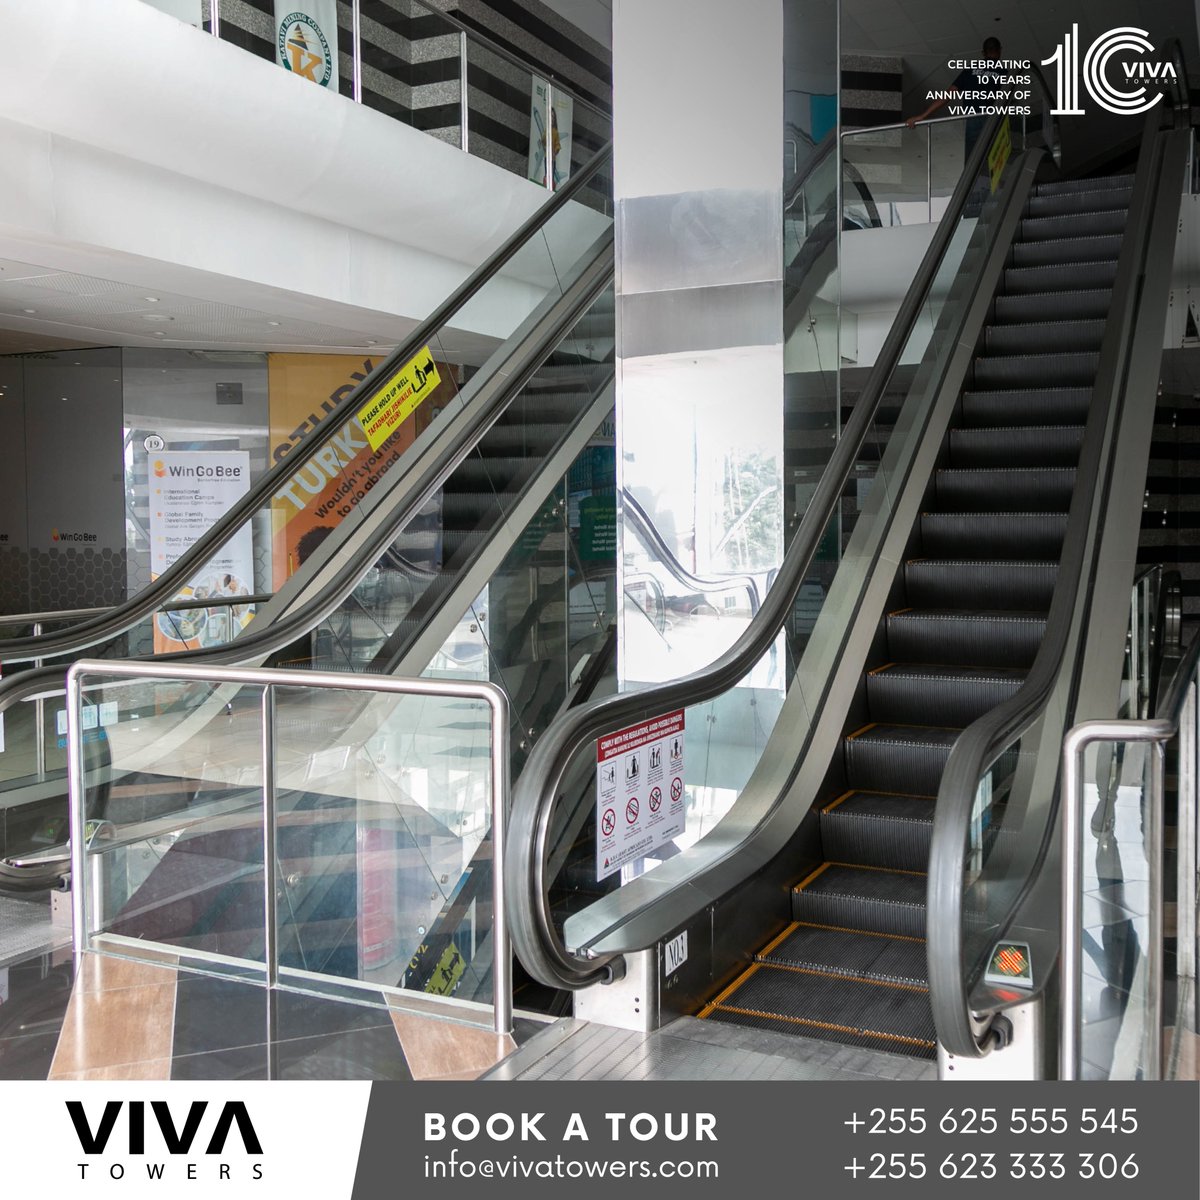 Step into convenience and comfort with our well-maintained escalator facility.
 #vivatowers #vivatowers10years #10yearsanniversary #commercial #Anniversary #security #officespaces #officespace #daressalaam #shopspaces #landmark